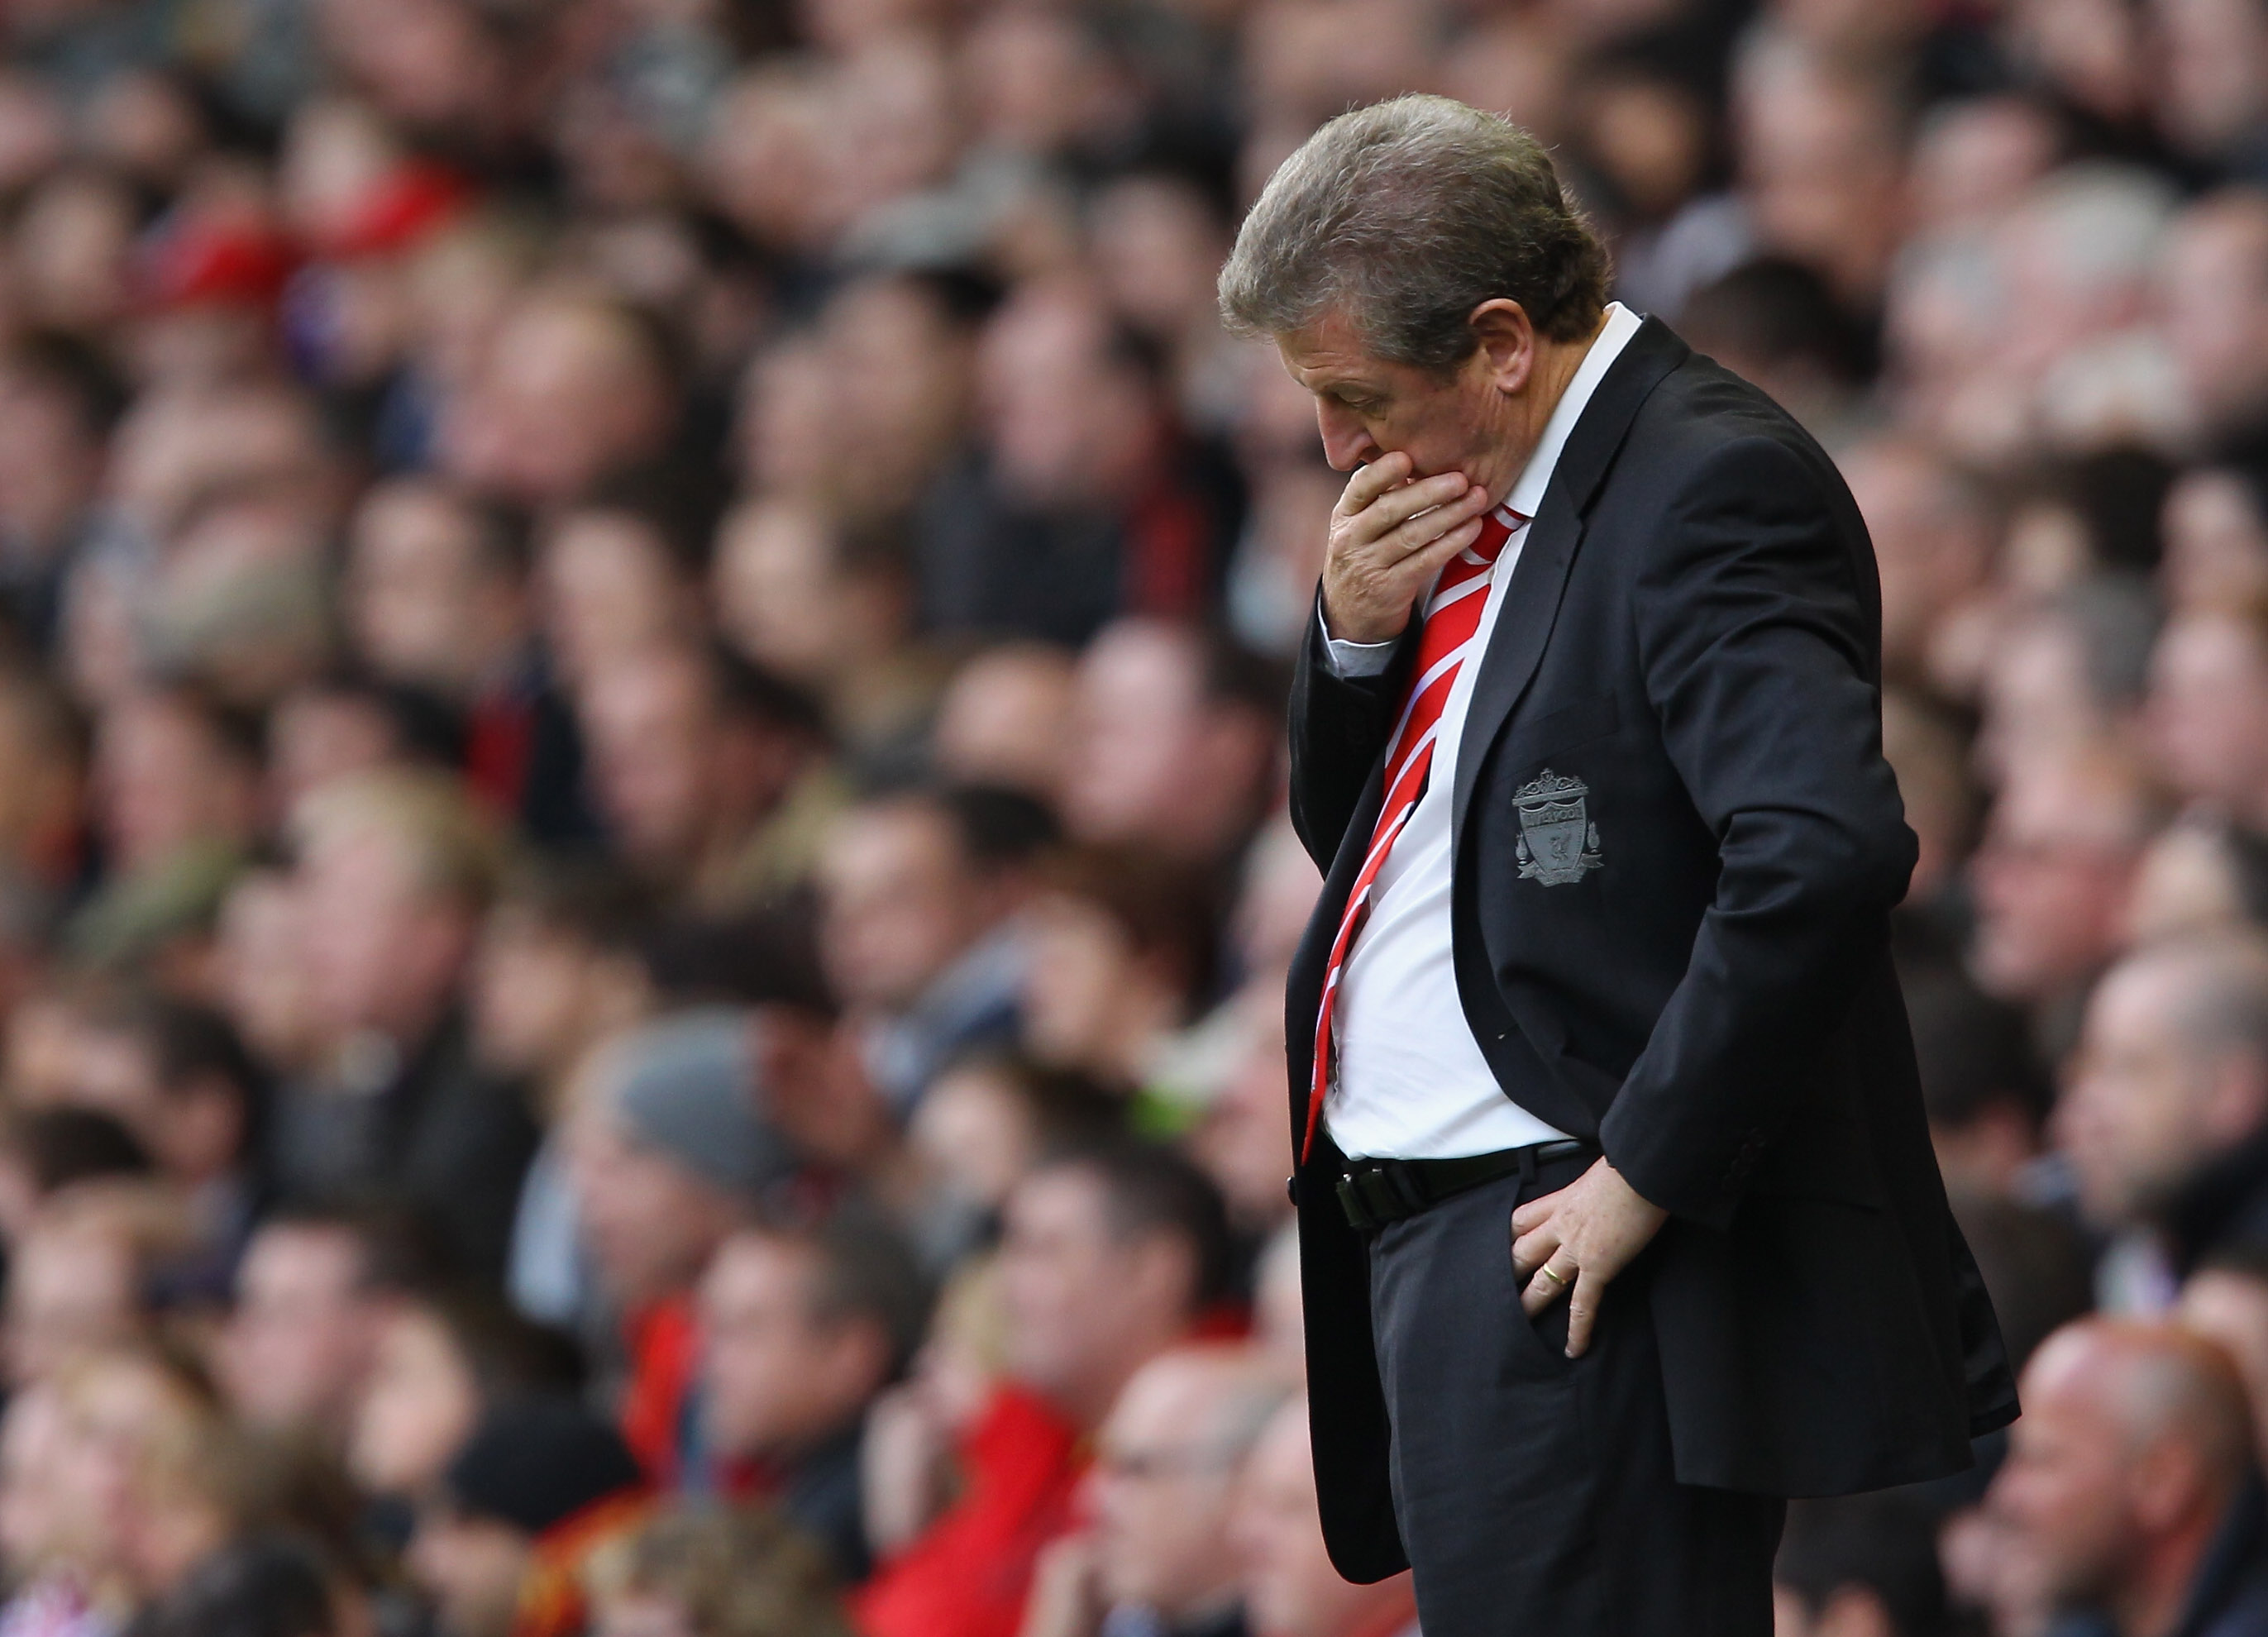 LIVERPOOL, ENGLAND - OCTOBER 03:  Roy Hodgson the manager of Liverpool looks dejected during the Barclays Premier League match between Liverpool and Blackpool at Anfield on October 3, 2010 in Liverpool, England.  (Photo by Alex Livesey/Getty Images)